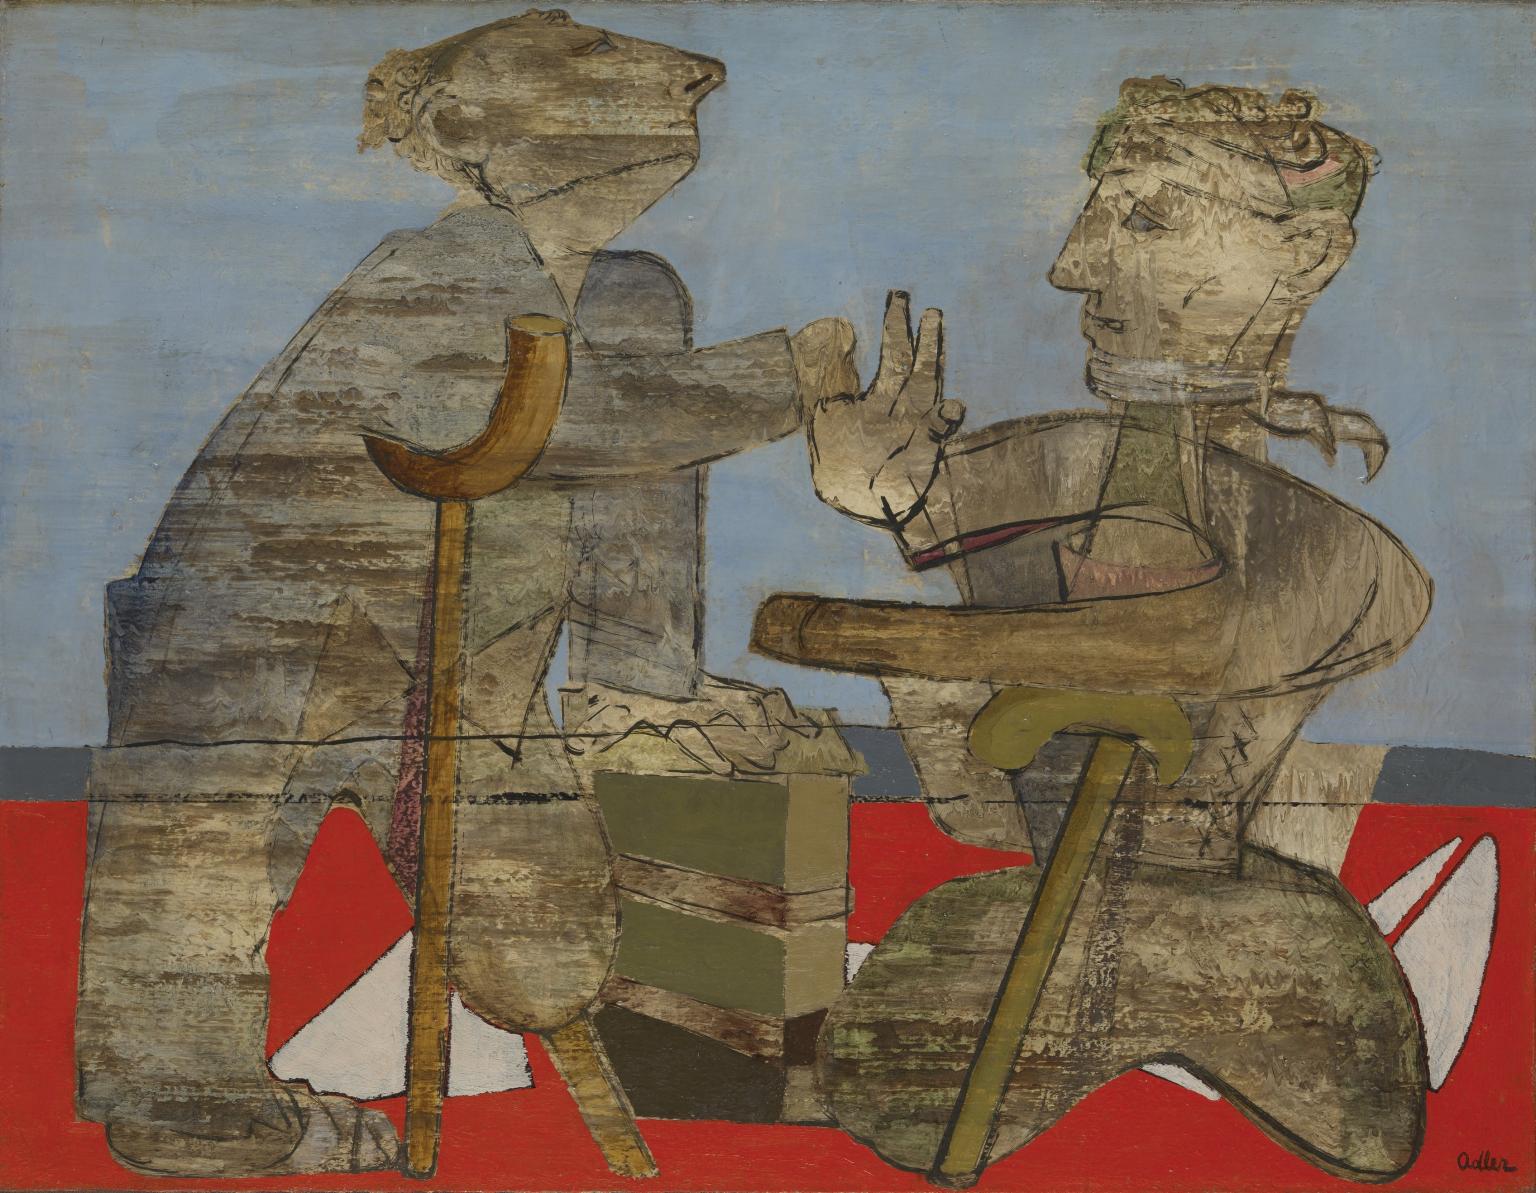 Painting of two mutilated soldiers with crutches, one with no legs and the other with one leg.